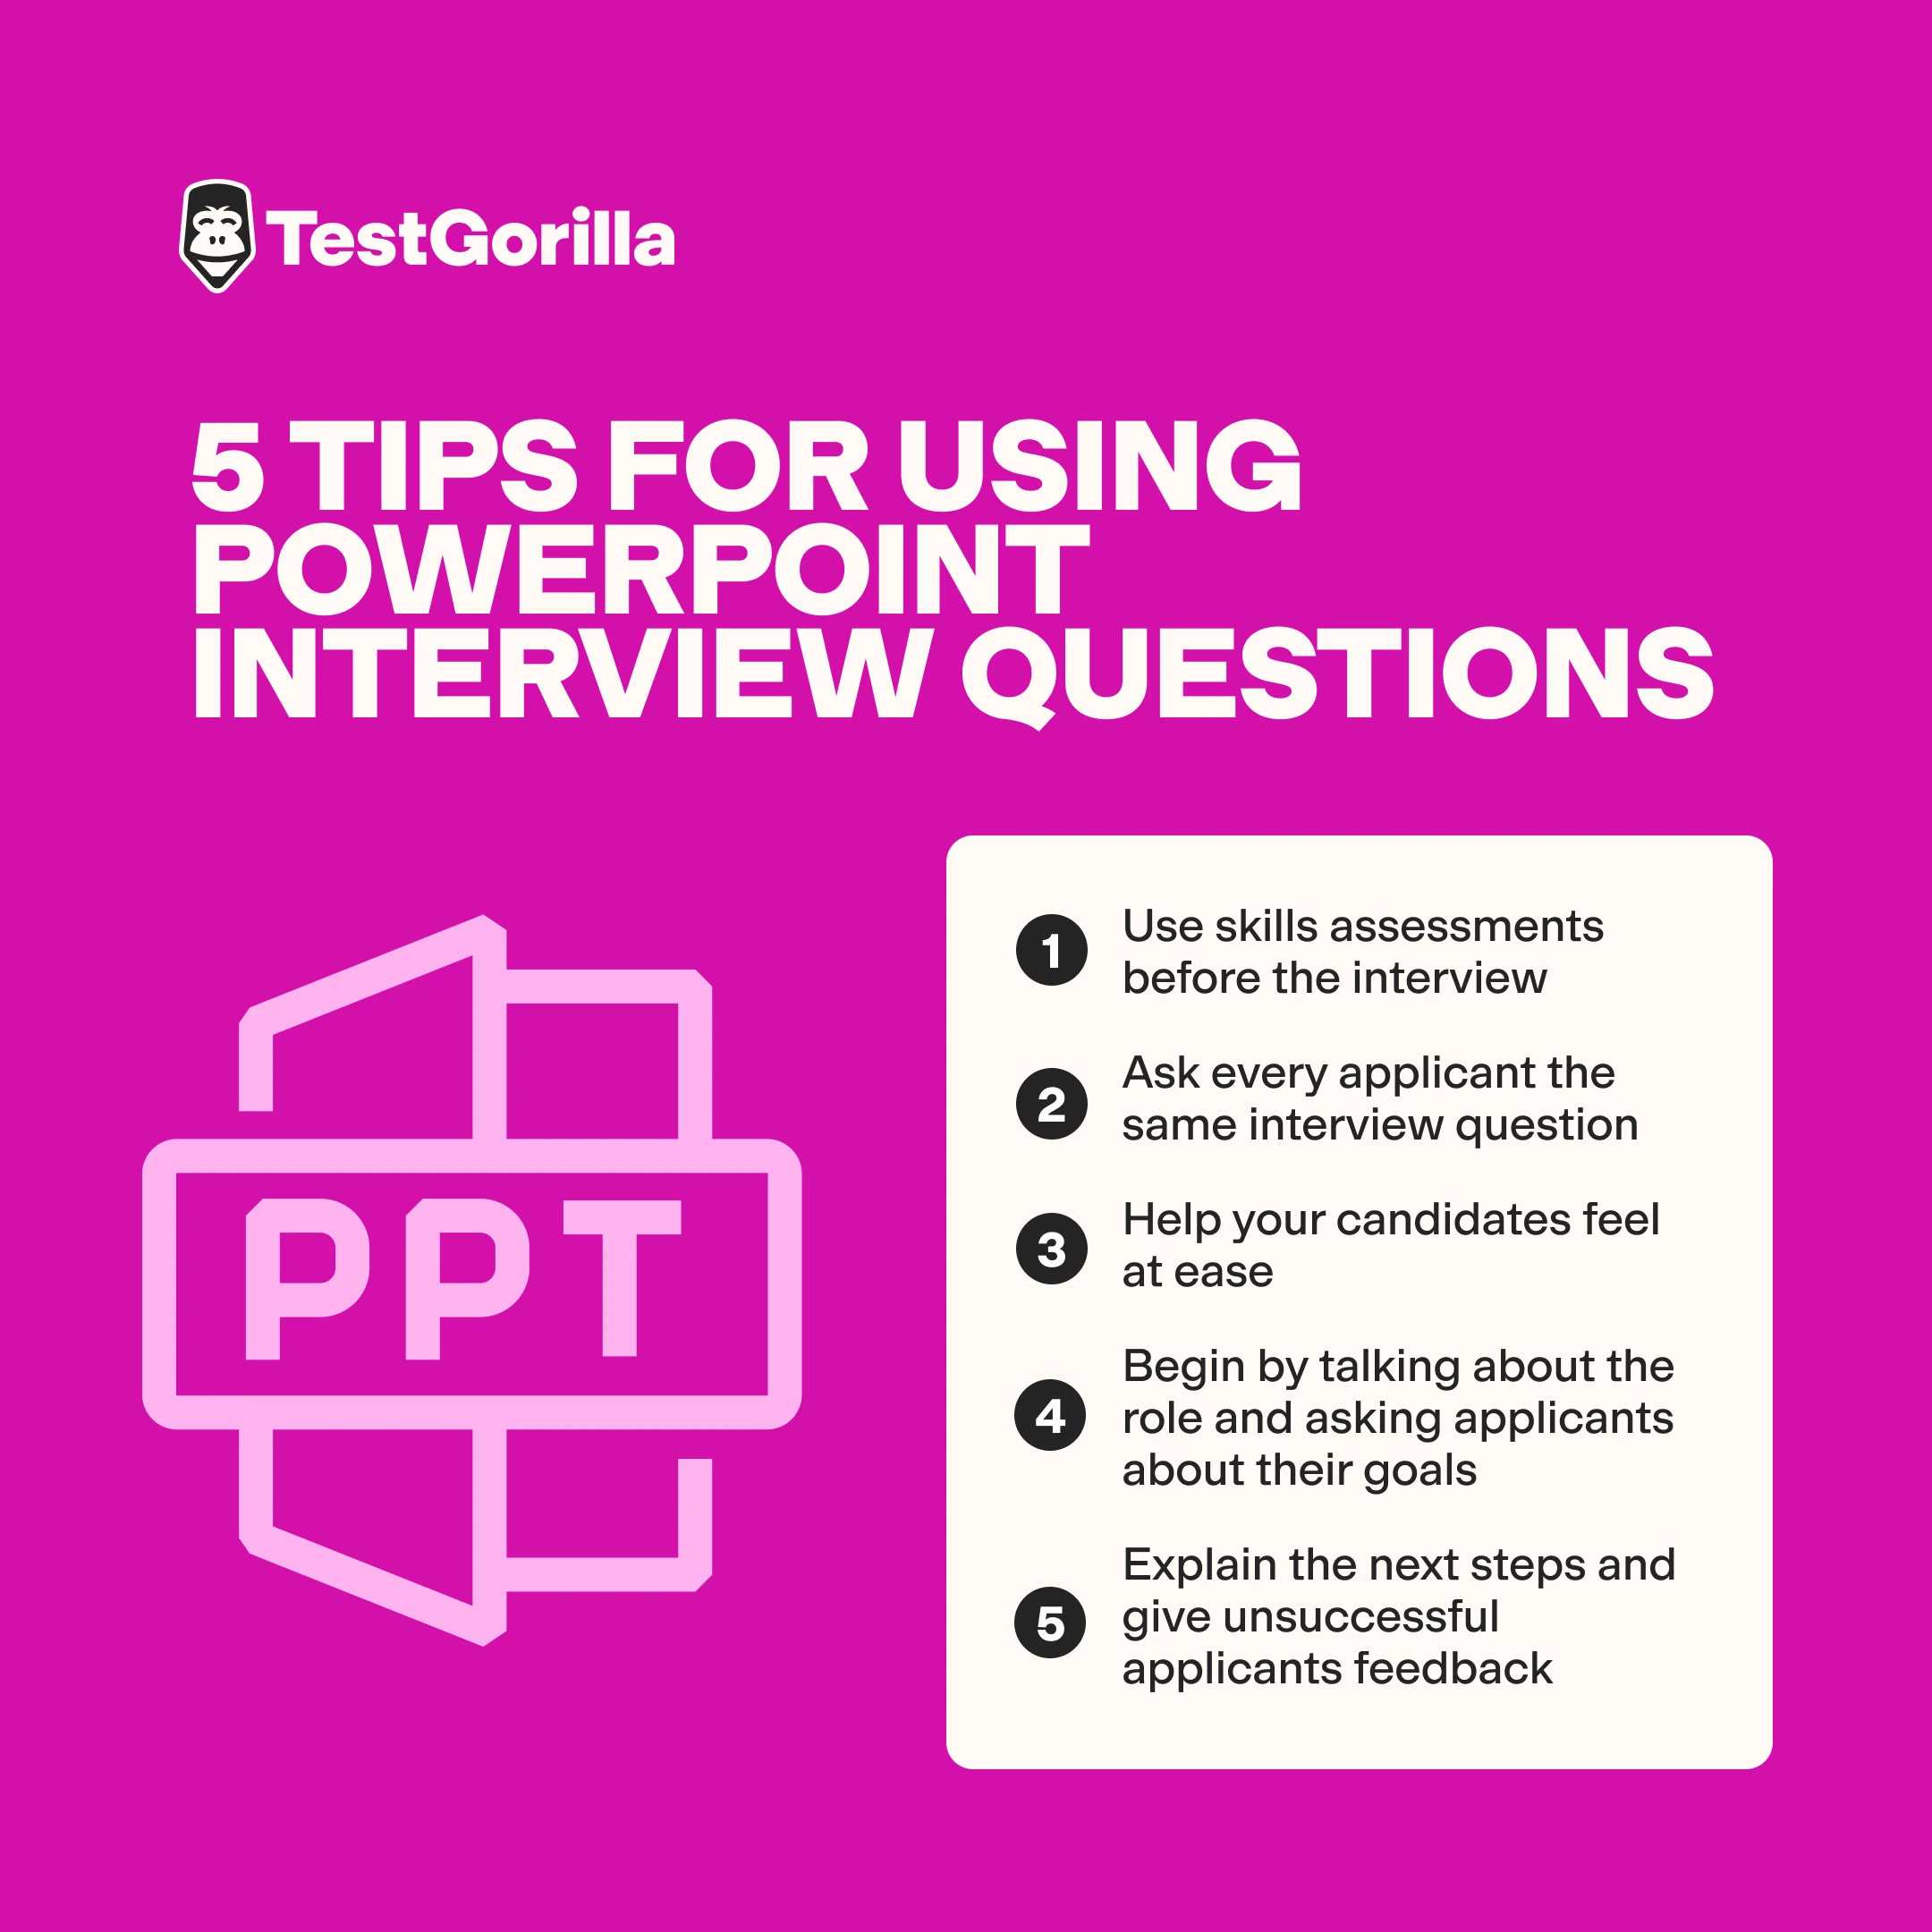 tips for using PowerPoint interview questions 